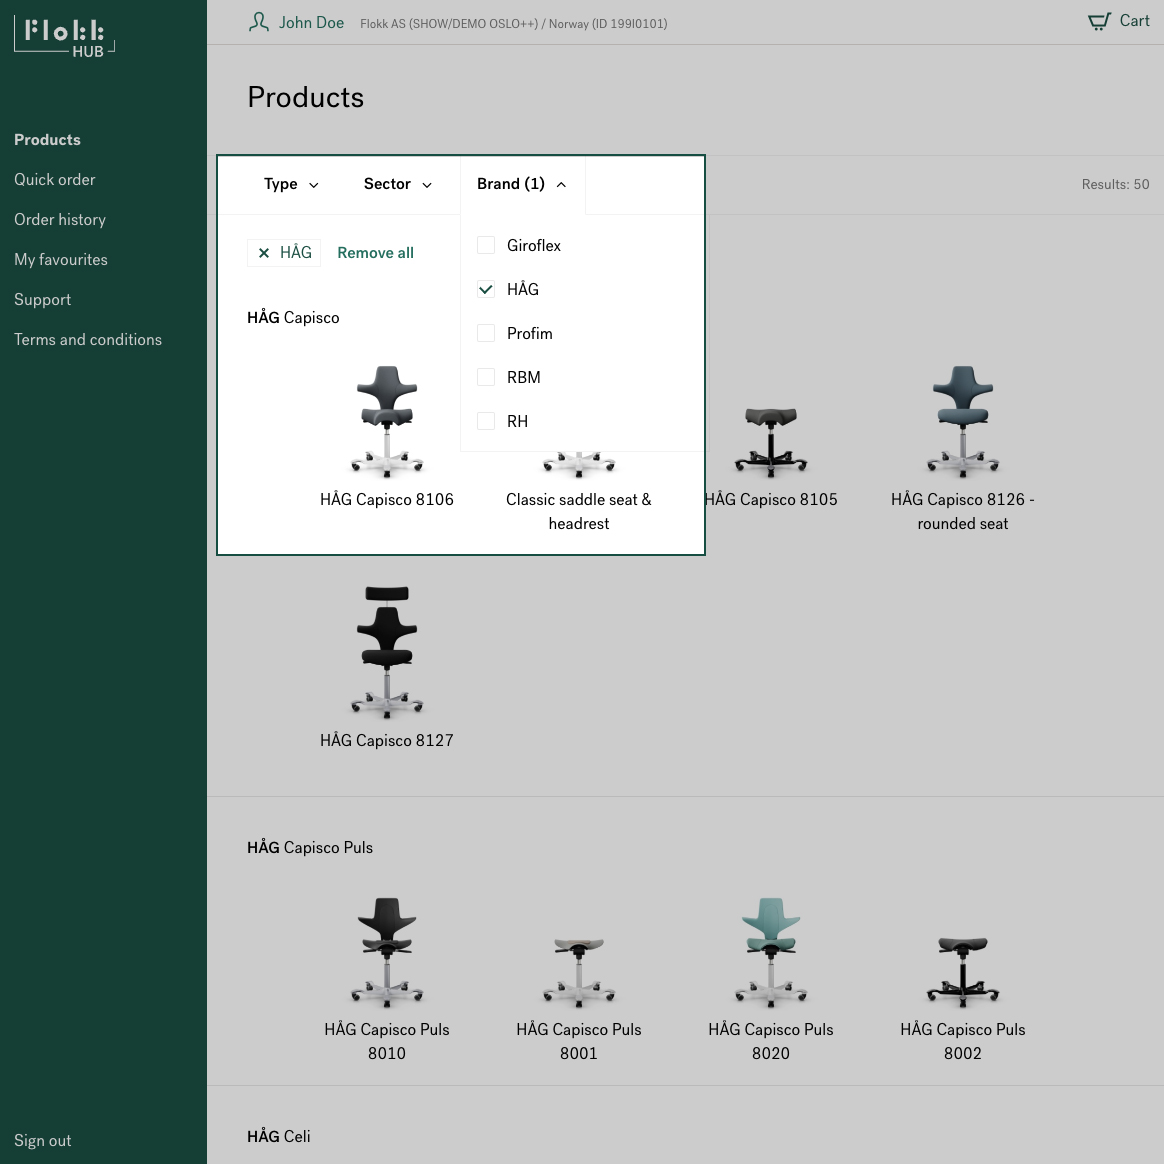 Filtering products in Flokk Hub